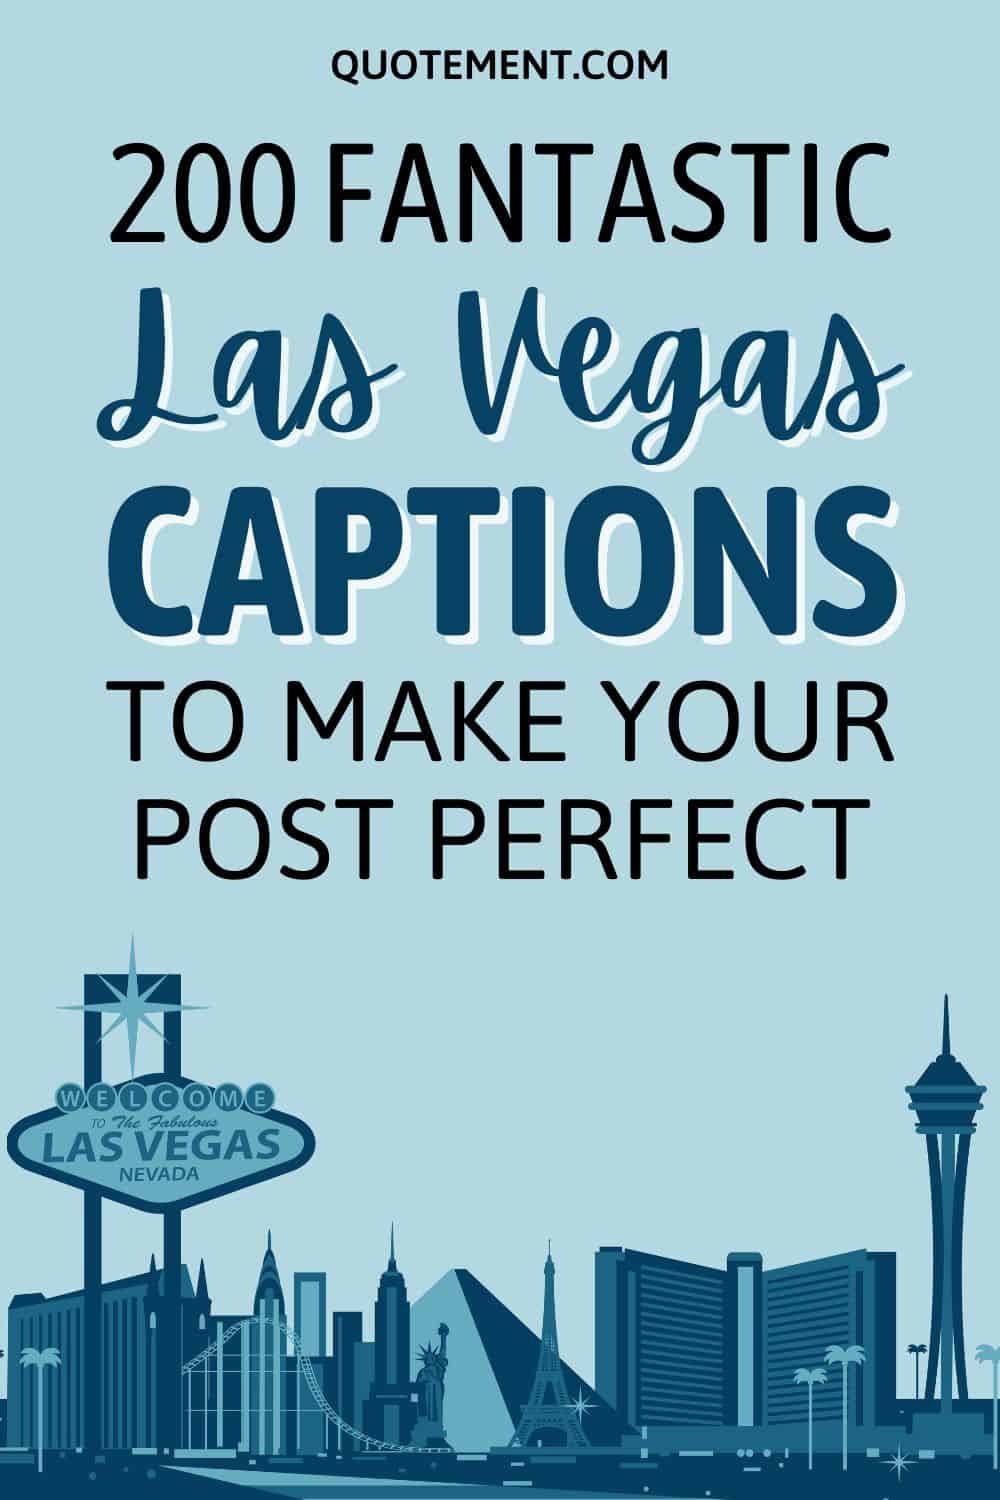 200 Fantastic Las Vegas Captions To Make Your Post Perfect